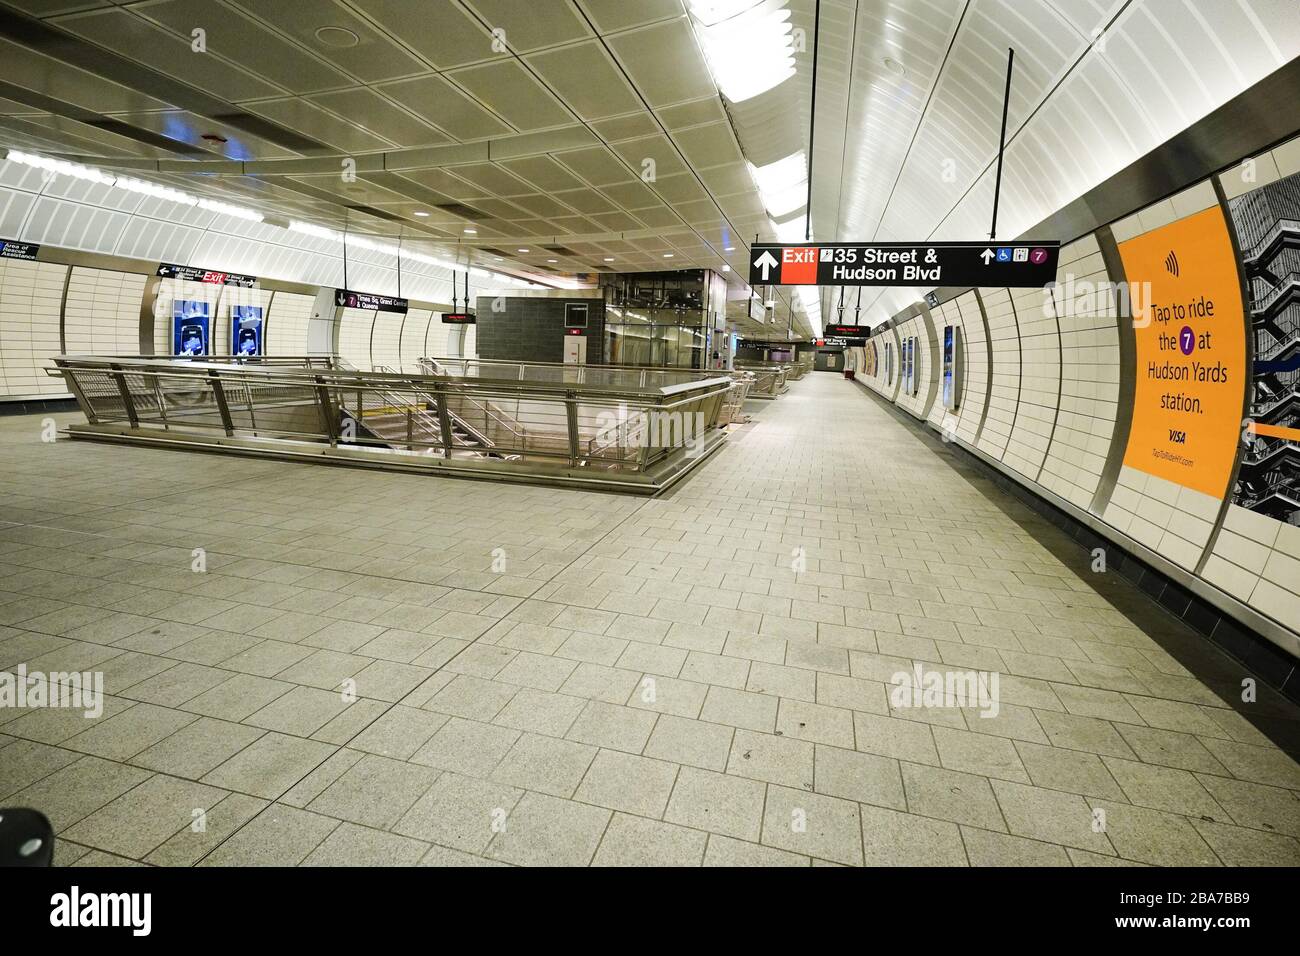 General overall view of the empty MTA - 34th Street Hudson Yards Subway Station in the wake of the coronavirus COVID-19 pandemic outbreak, Sunday, March 15, 2020, in New York. (Photo by IOS/Espa-Images) Stock Photo